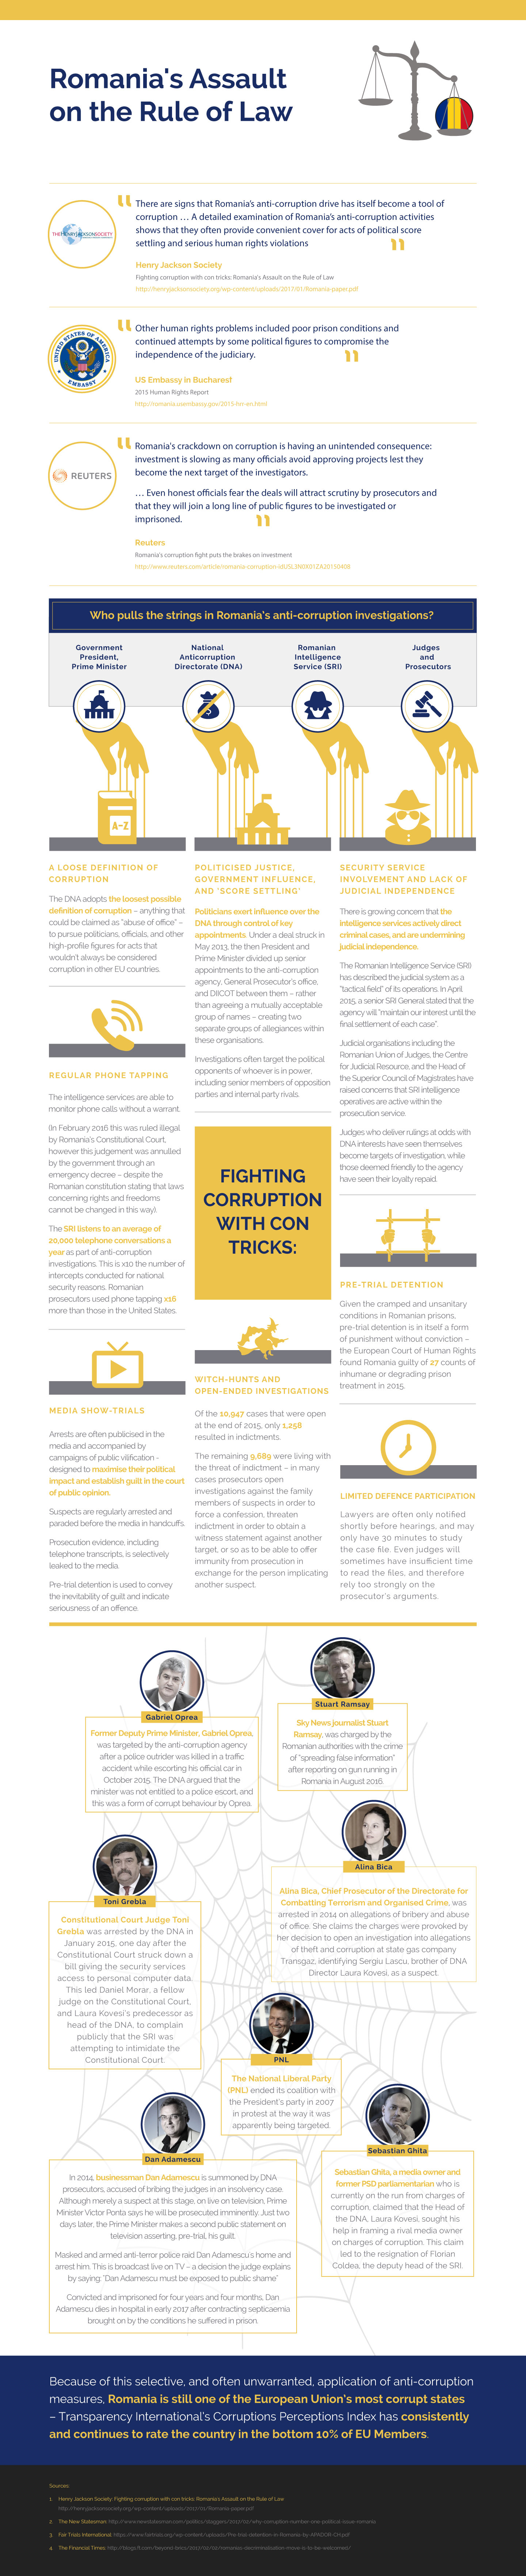 Romania's Assault on the Rule of Law - infographic